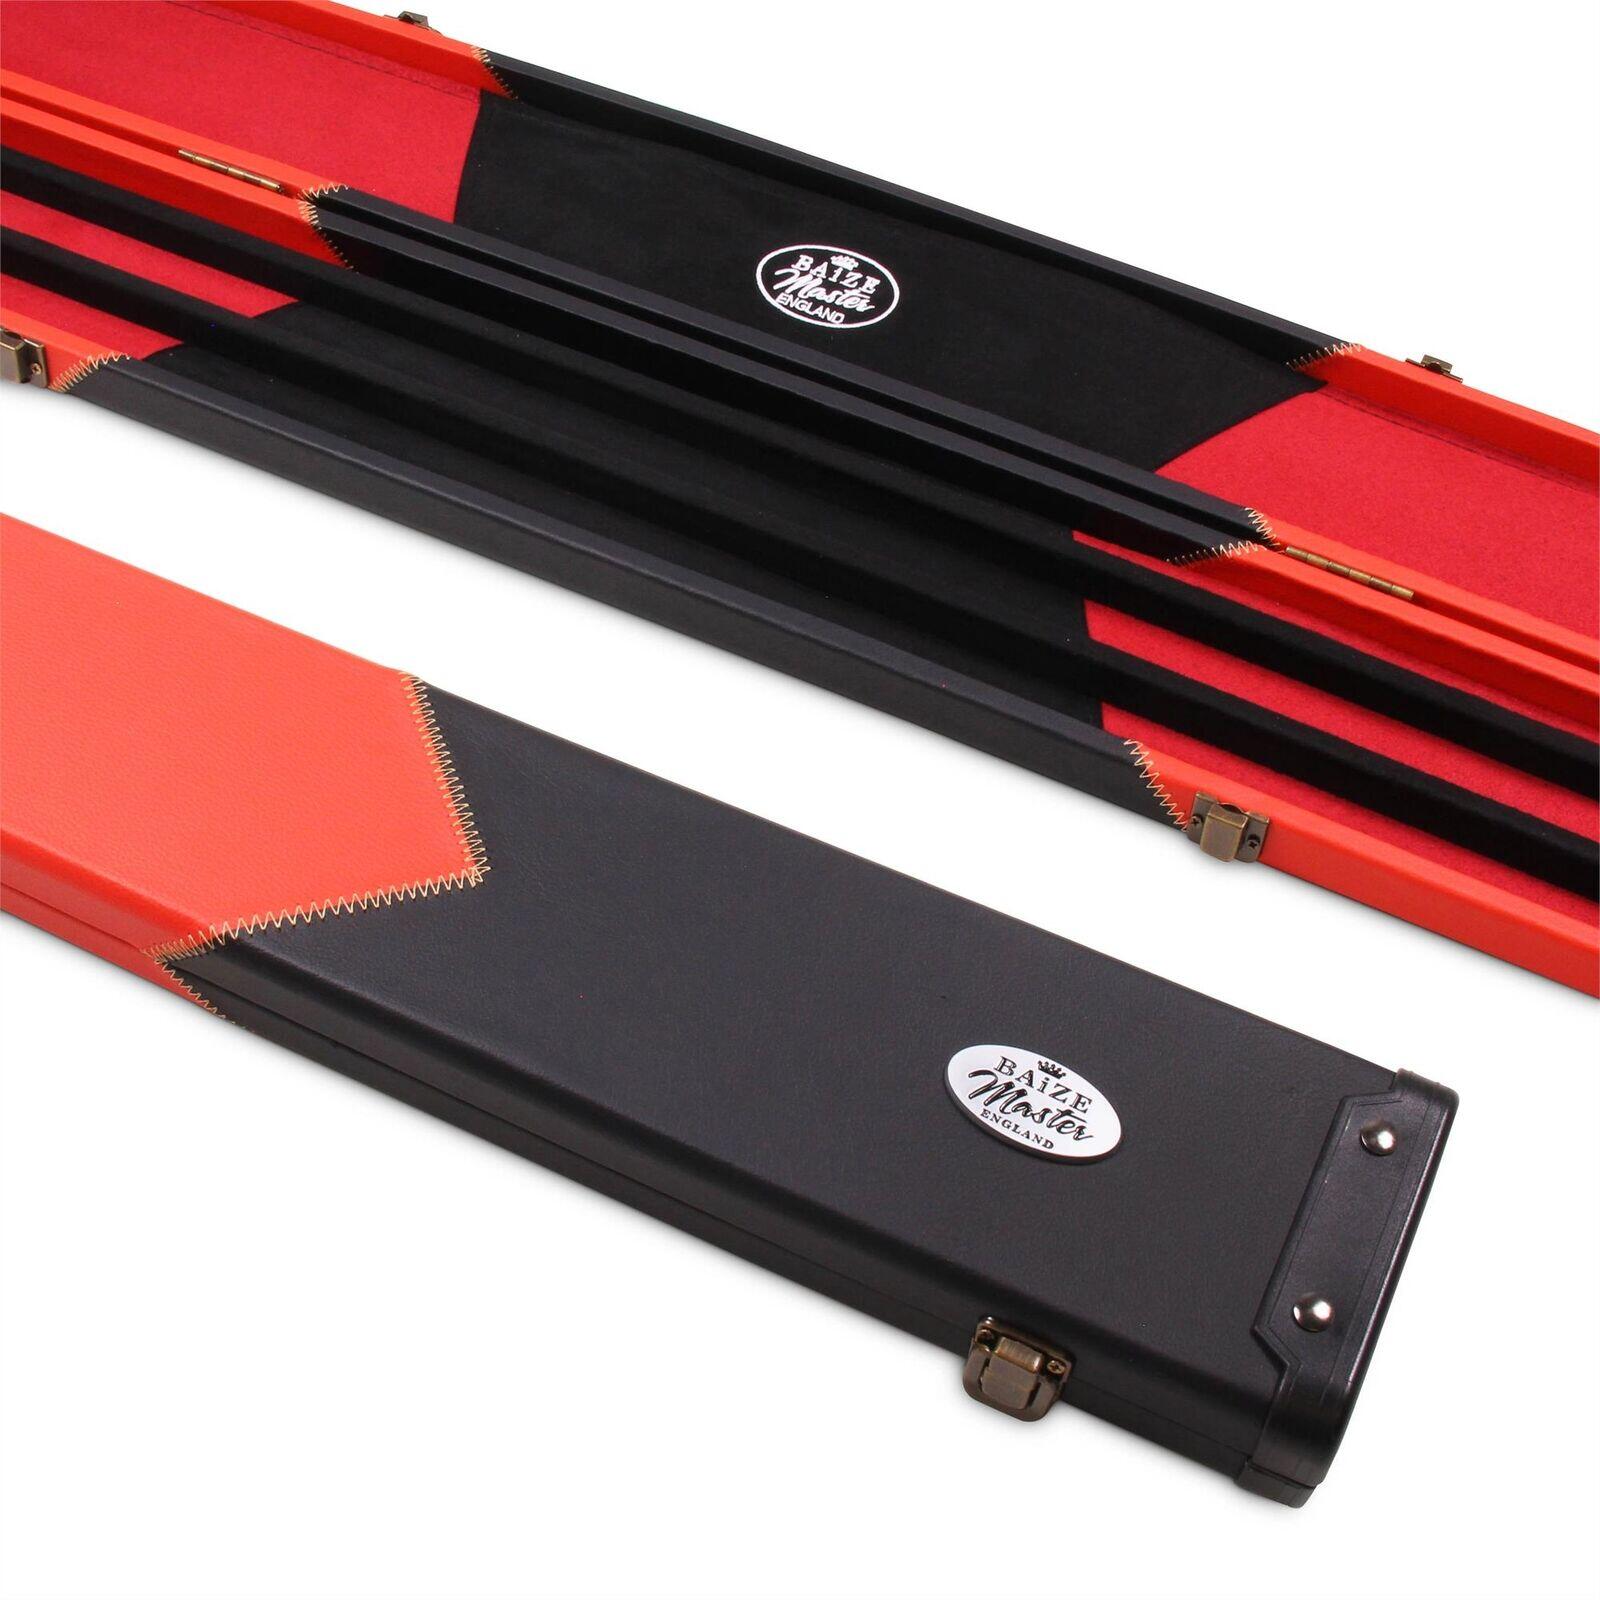 Baize Master 1 Piece WIDE RED ARROW Snooker Pool Cue Case - Holds 3 Cues 1/7